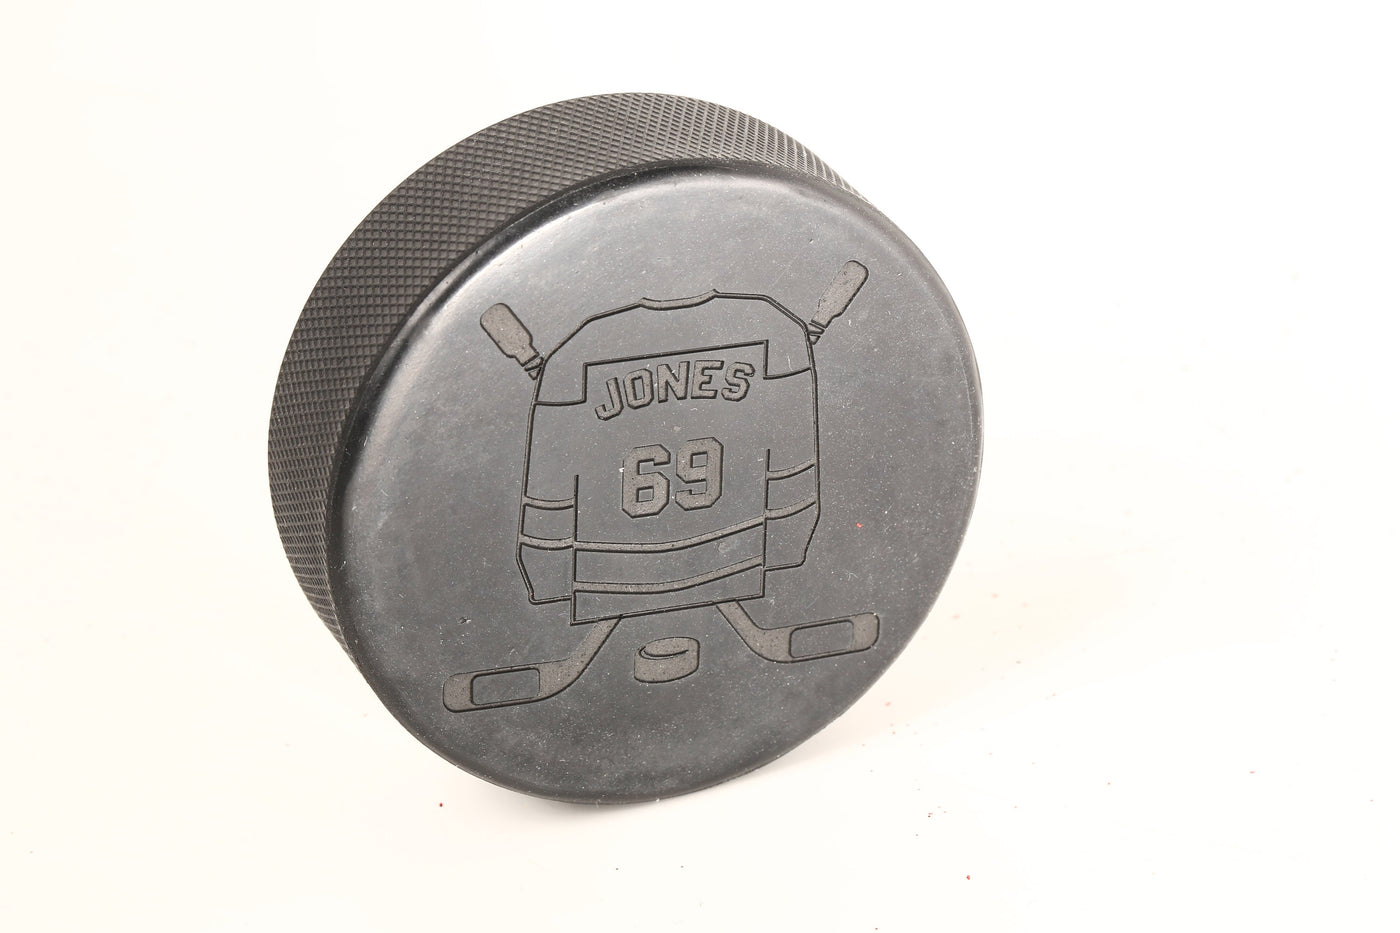 Personalized hockey pucks | coach gifts | hockey pucks | engraved hockey pucks | thank you gift | coaches gift | team player gift | engraved